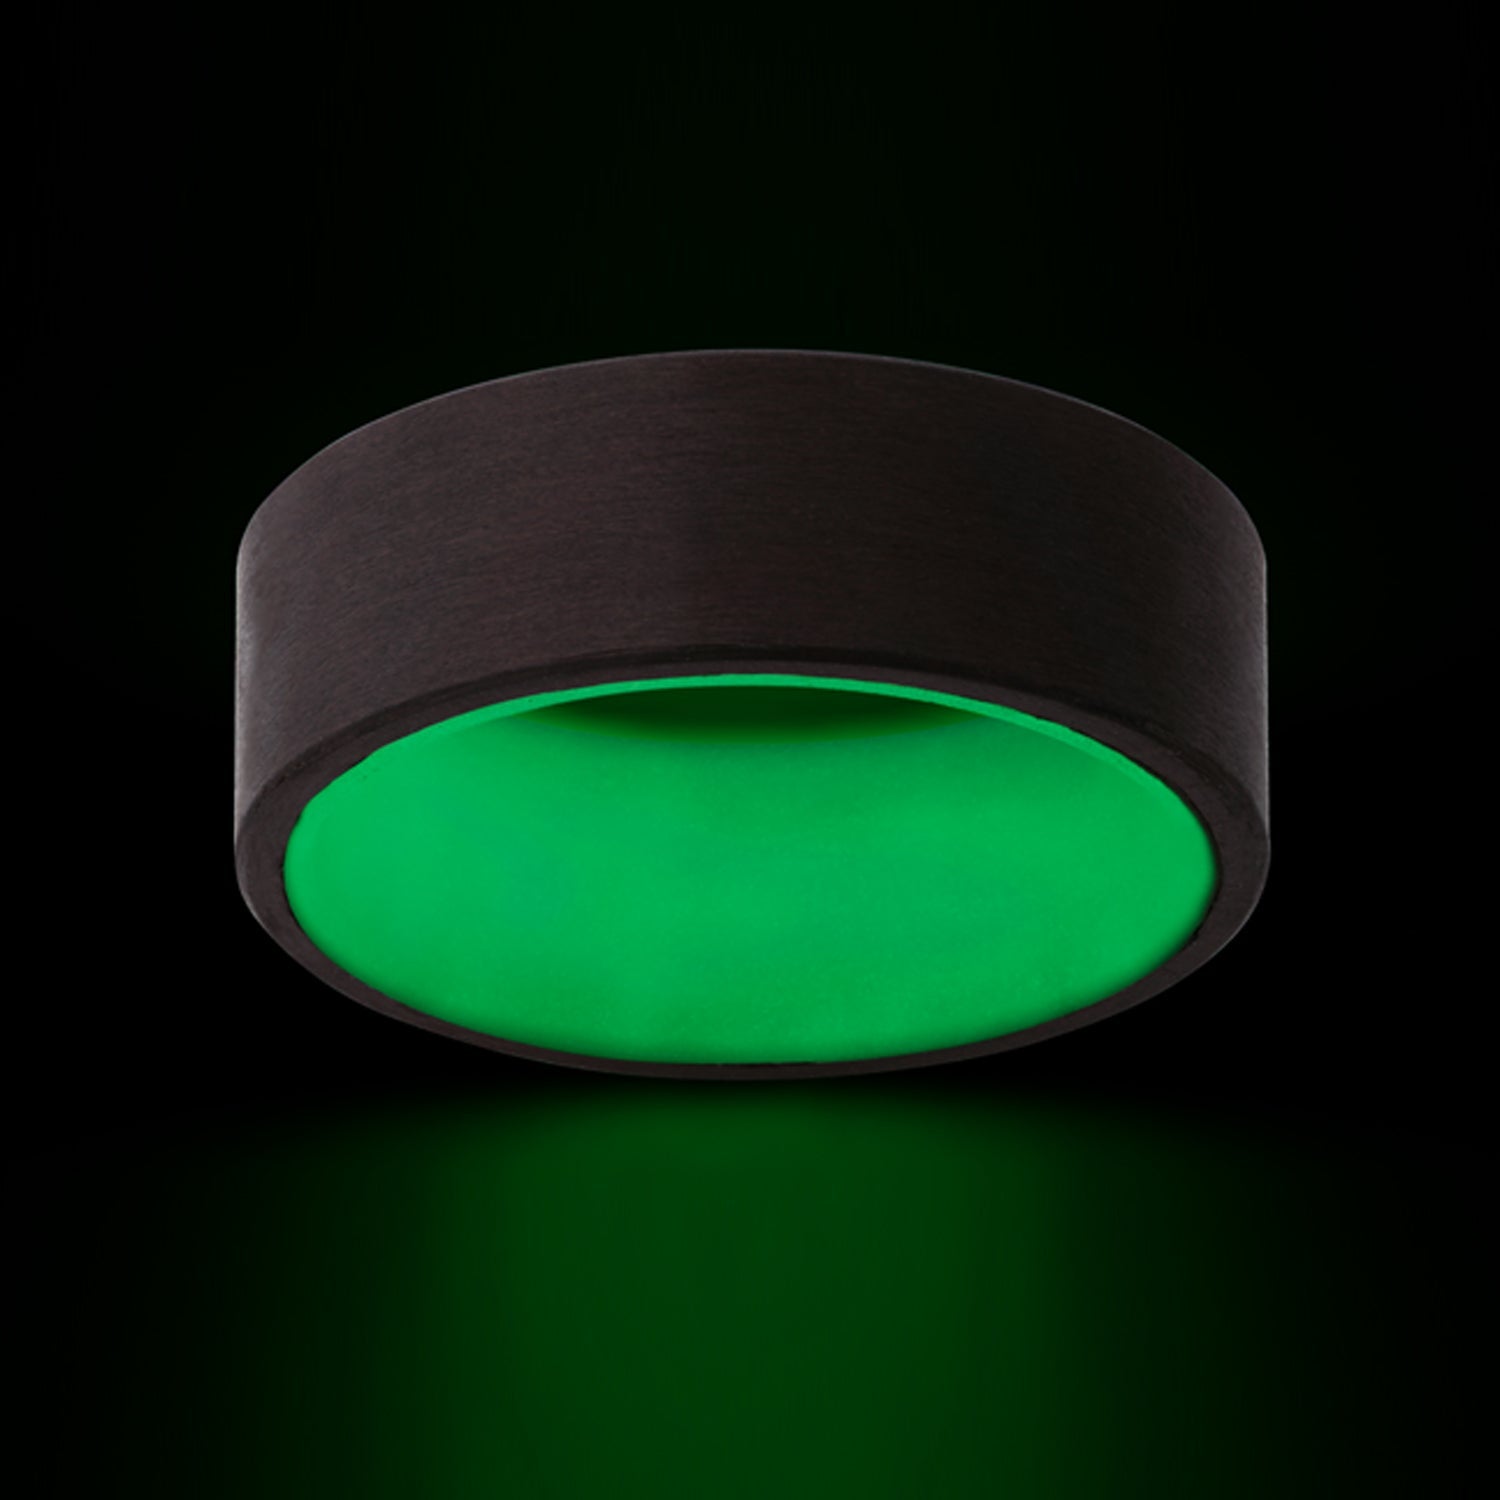 Glow in the Dark Carbon Fiber Wedding Band with Contrasting Green Center